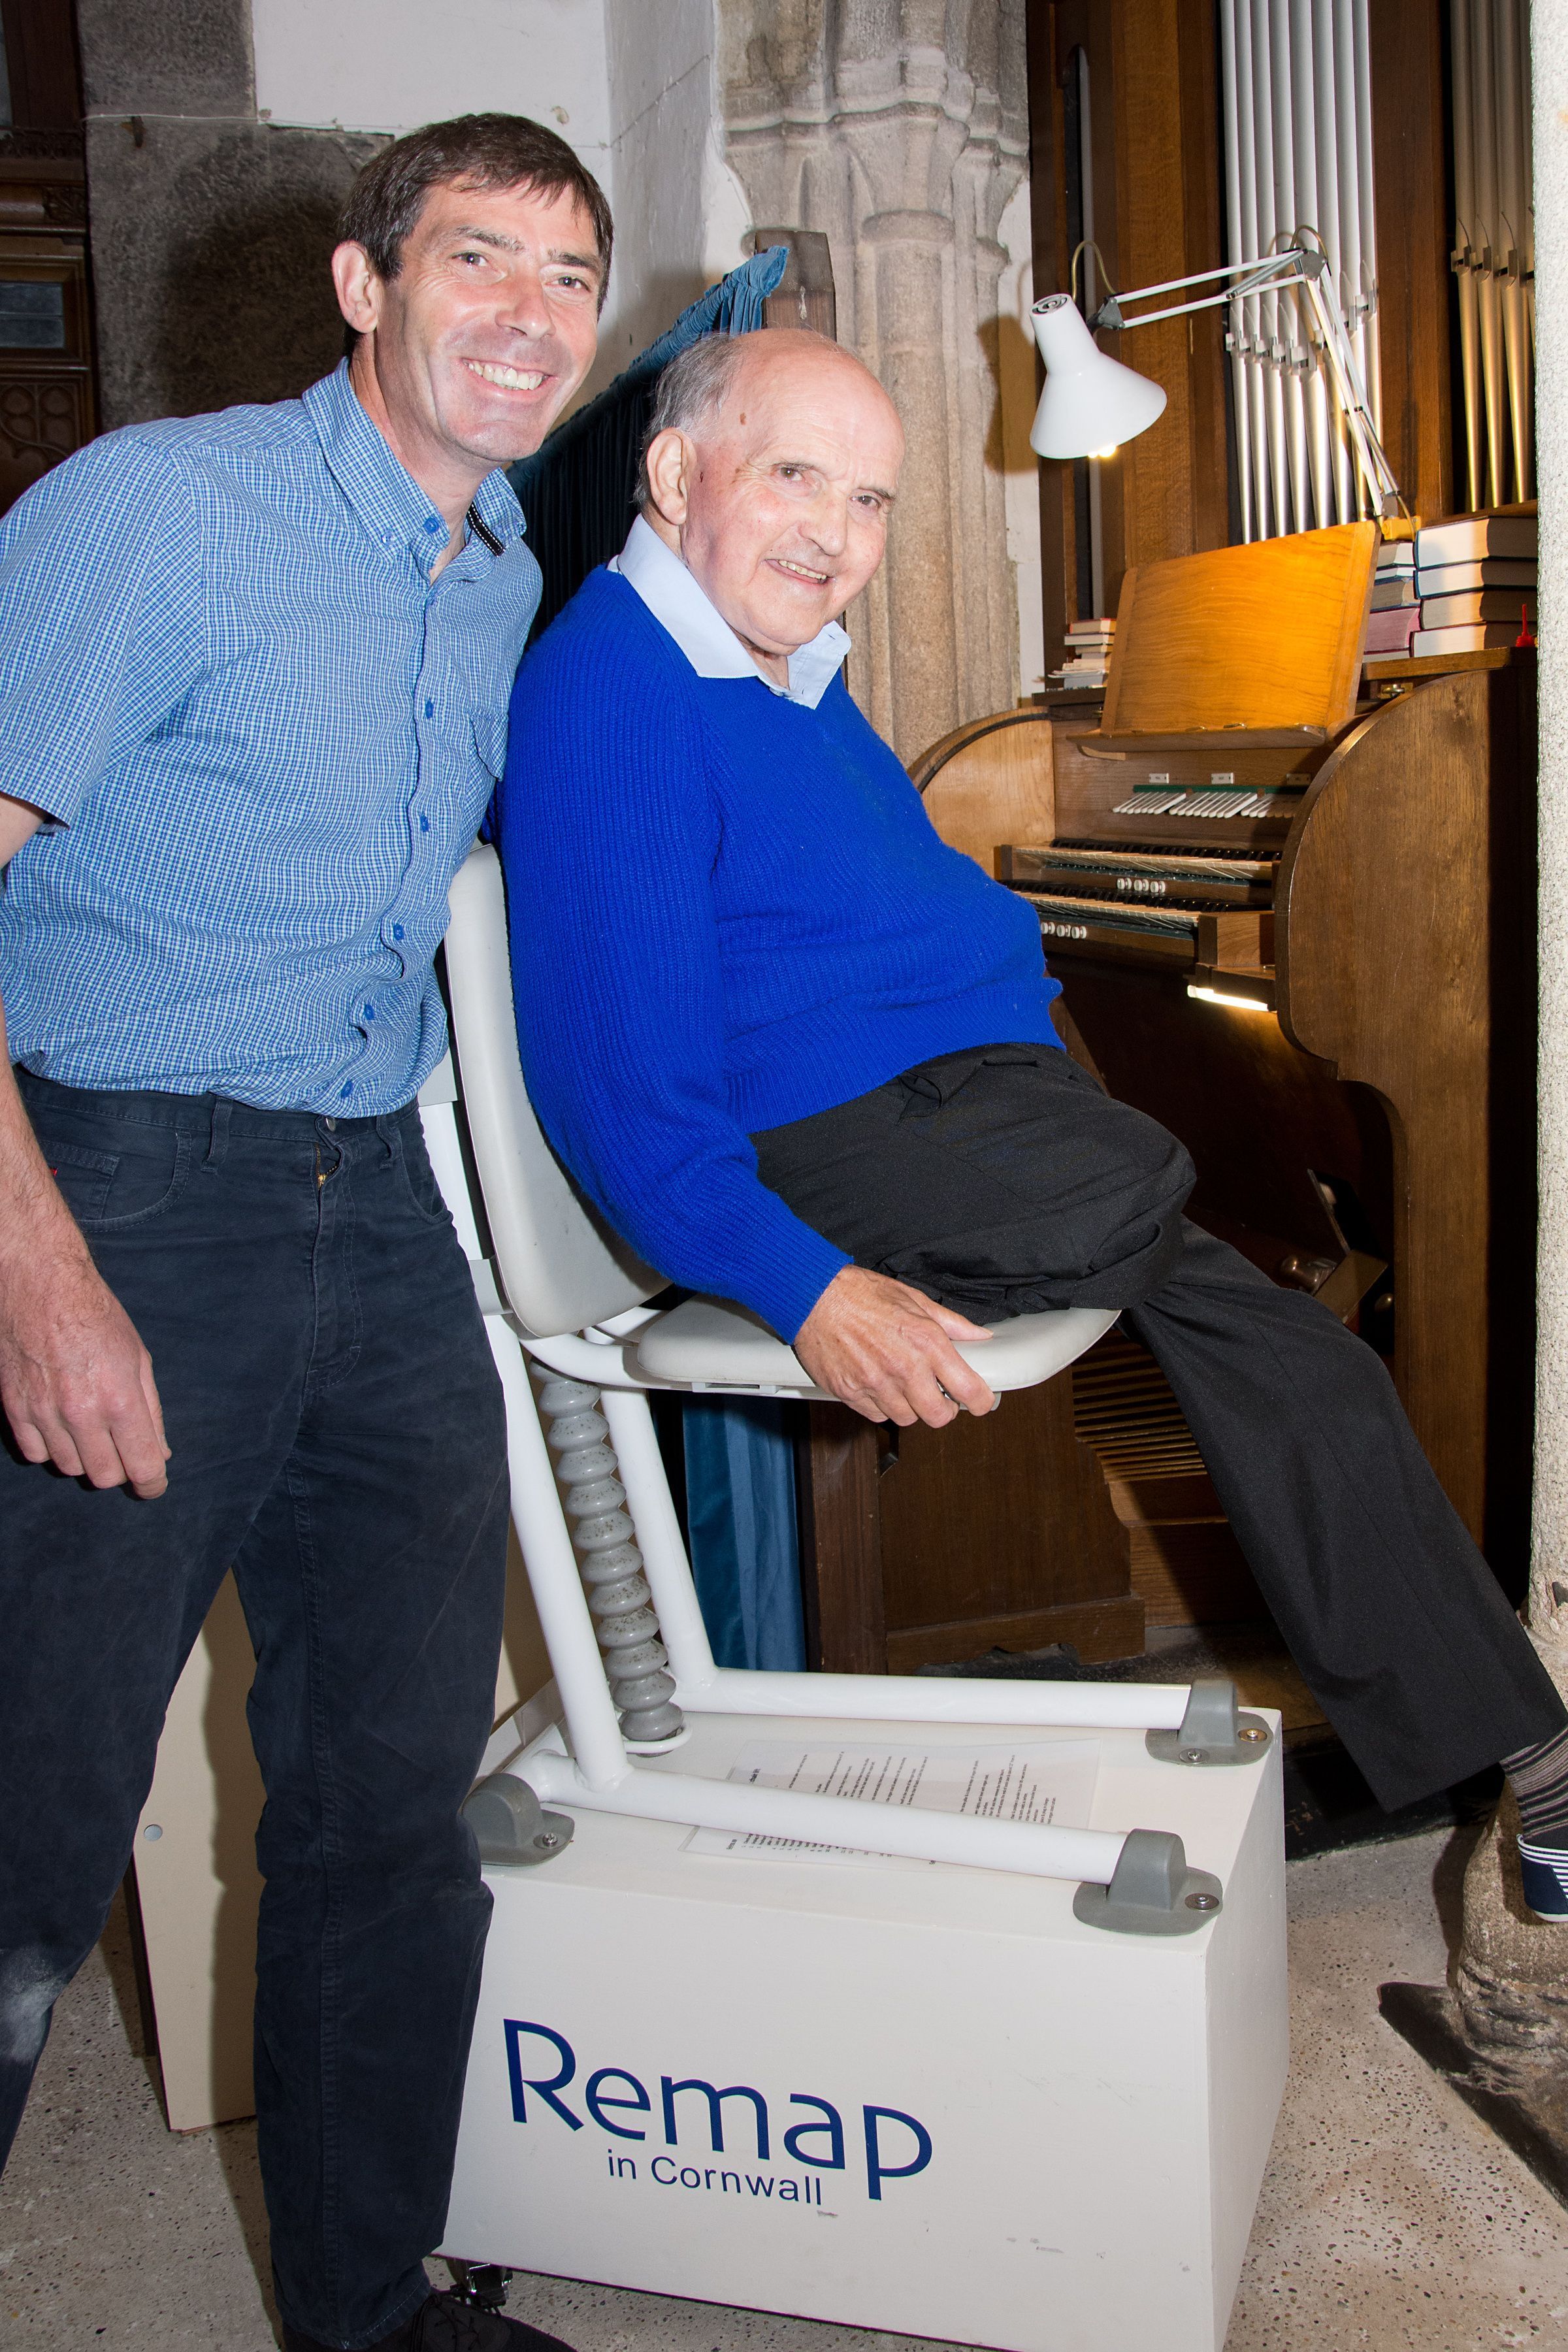 Colin pictured in 2014 after returning to play the organ at Mullion Parish Church despite havving his leg amputated